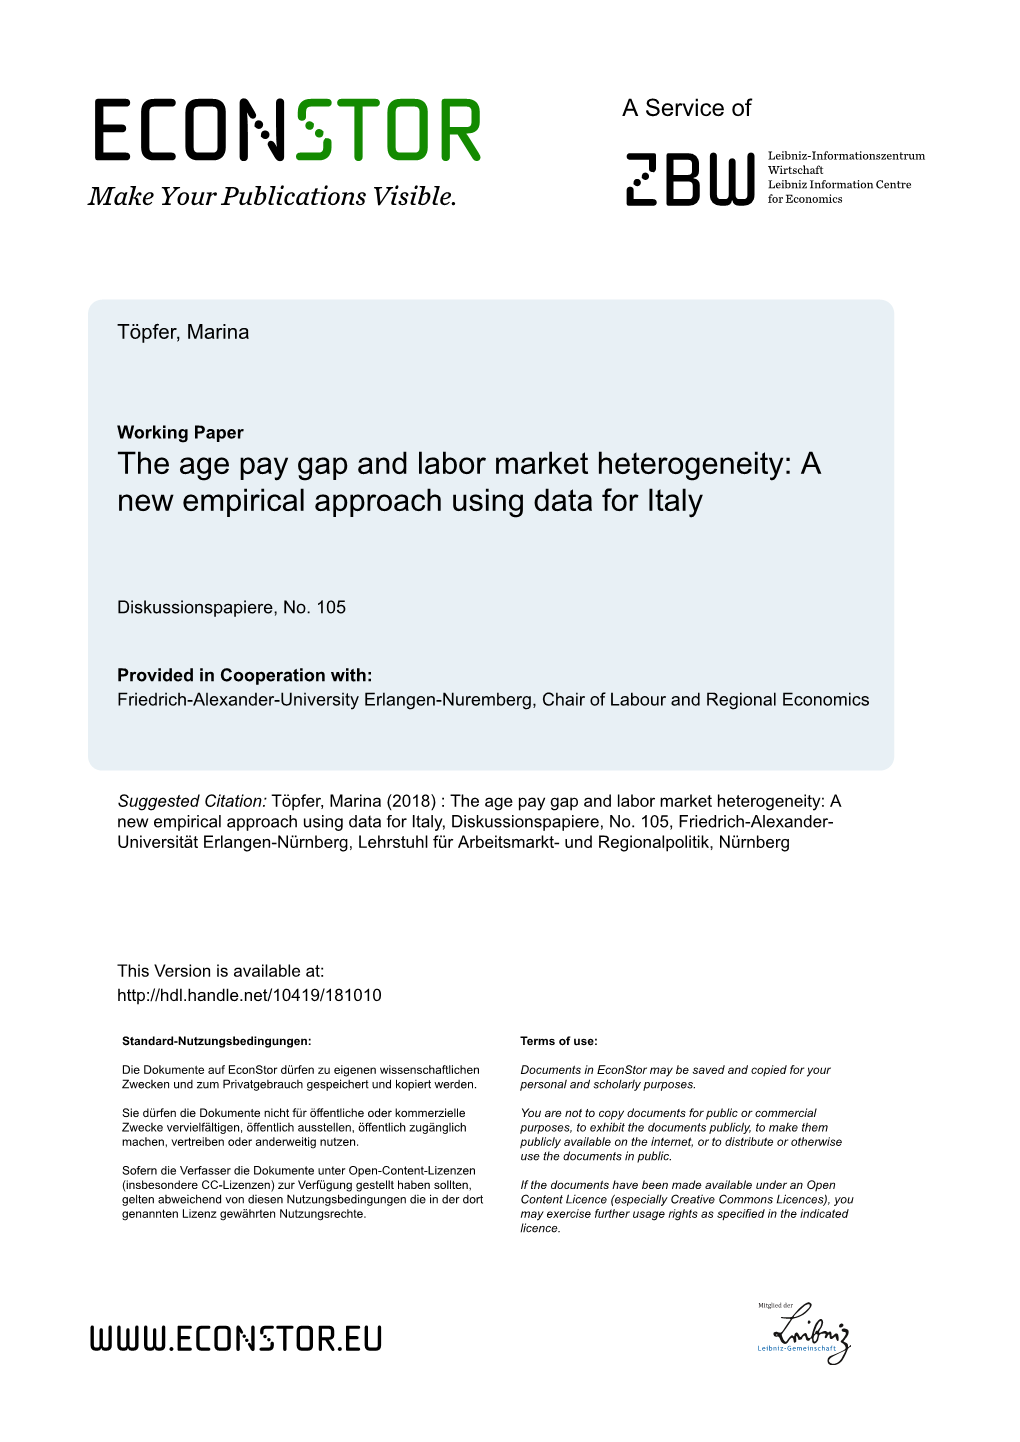 The Age Pay Gap and Labor Market Heterogeneity: a New Empirical Approach Using Data for Italy